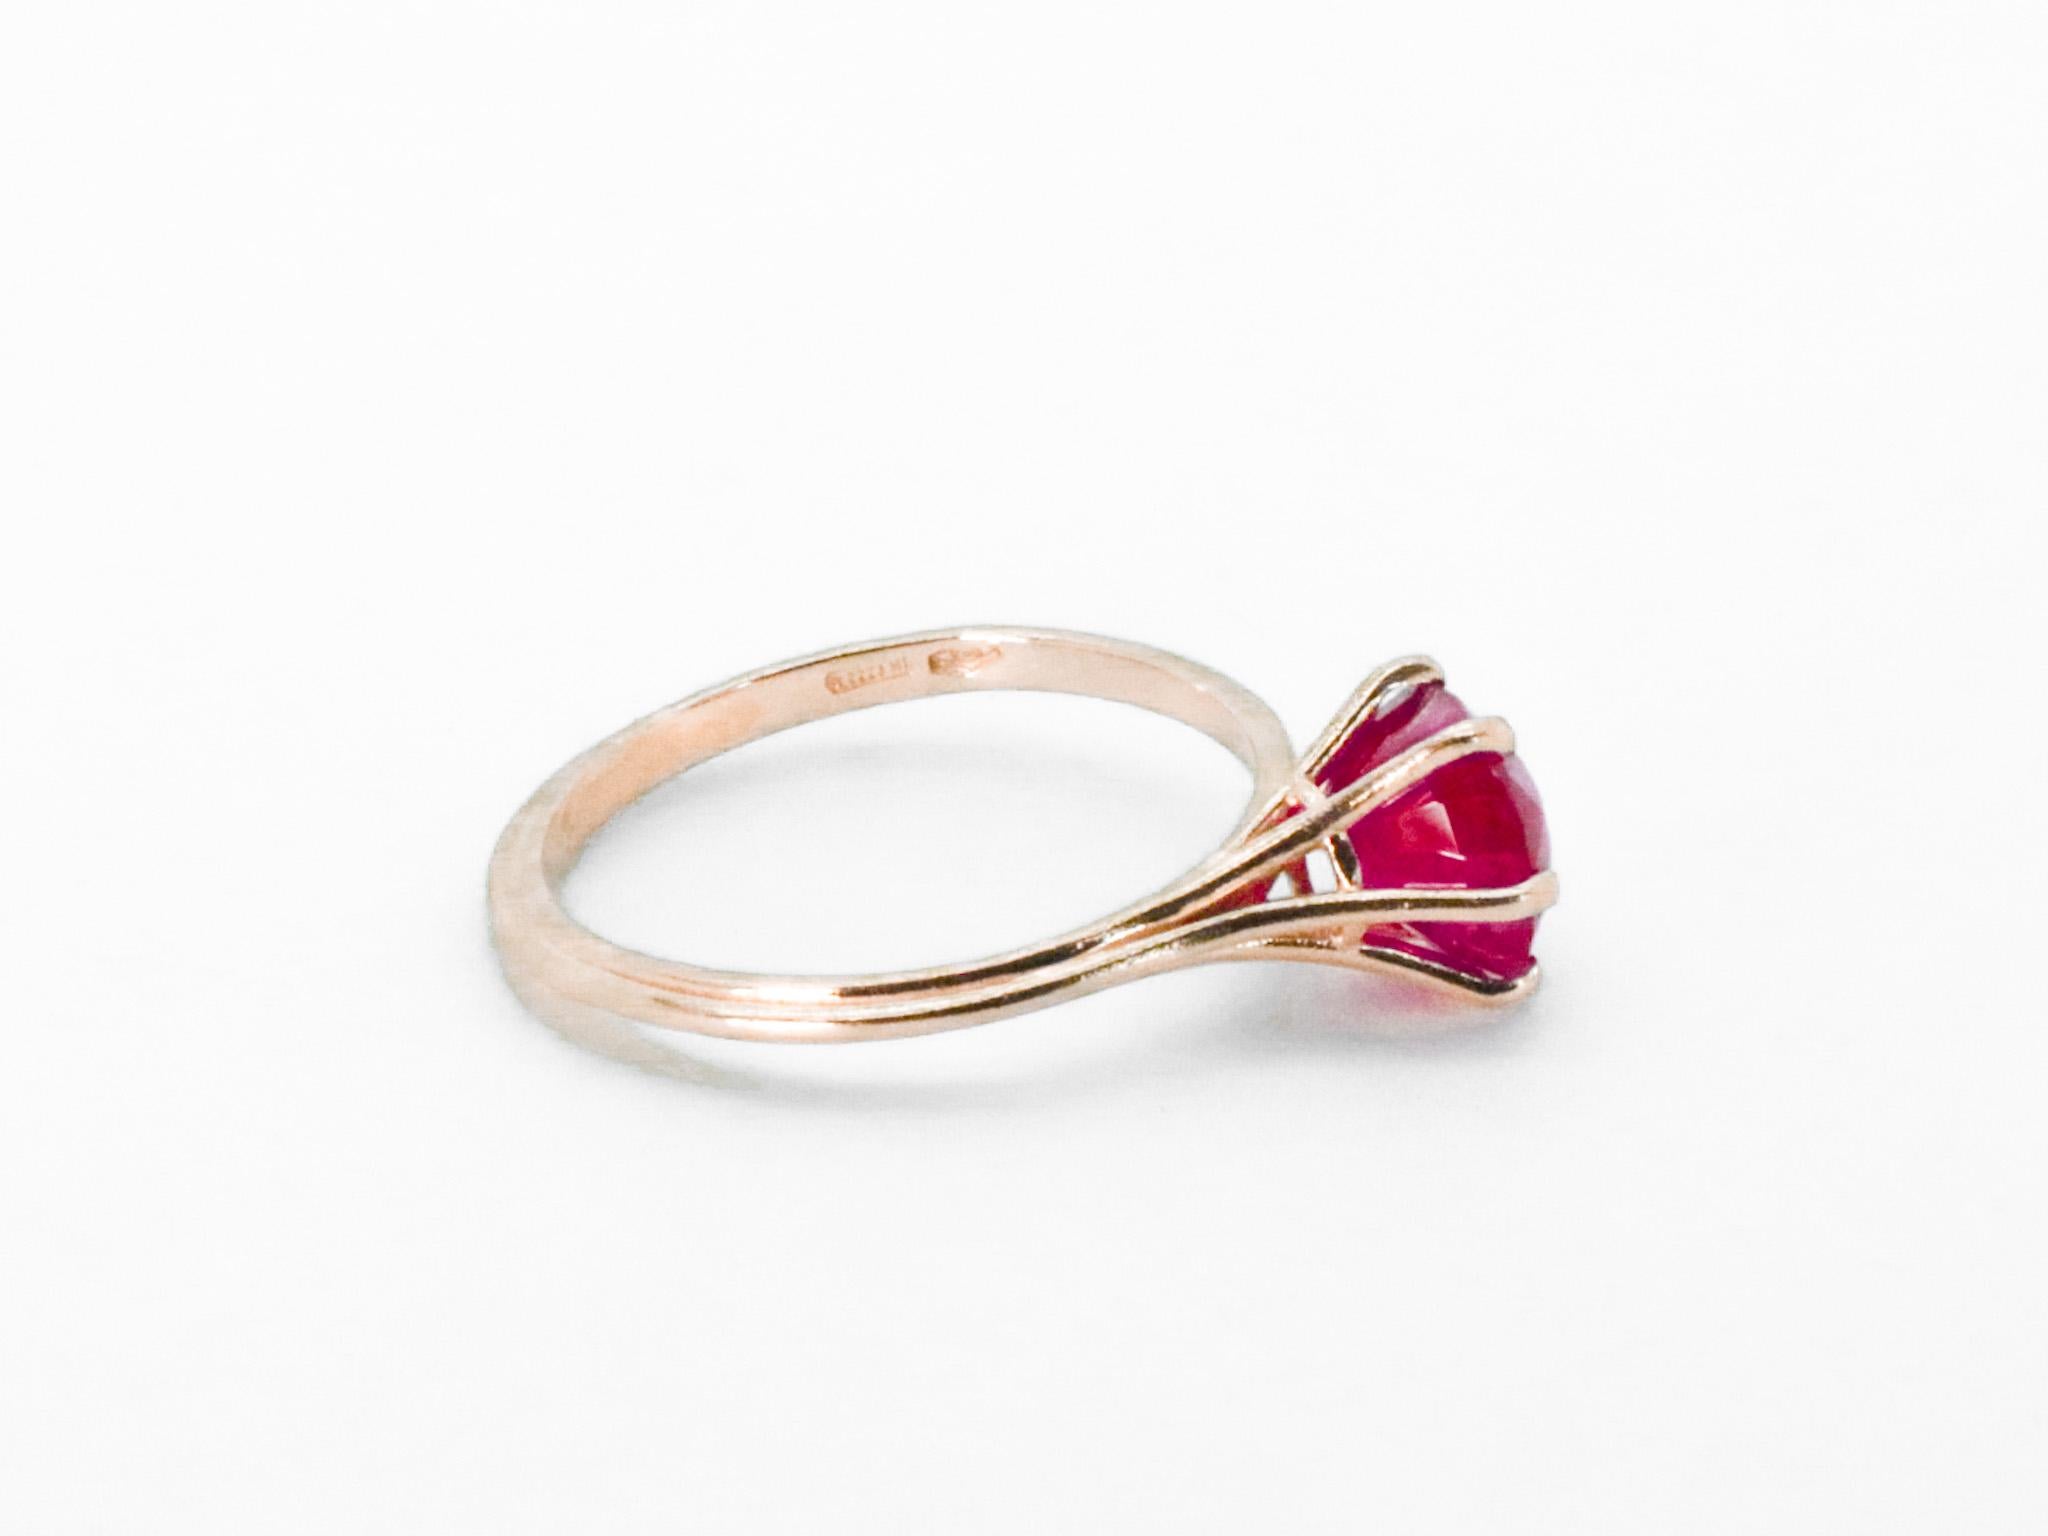 2.32 cts Burma Ruby 18k Rose Gold Stackable Asymmetrical Cosmic Design Ring For Sale 1